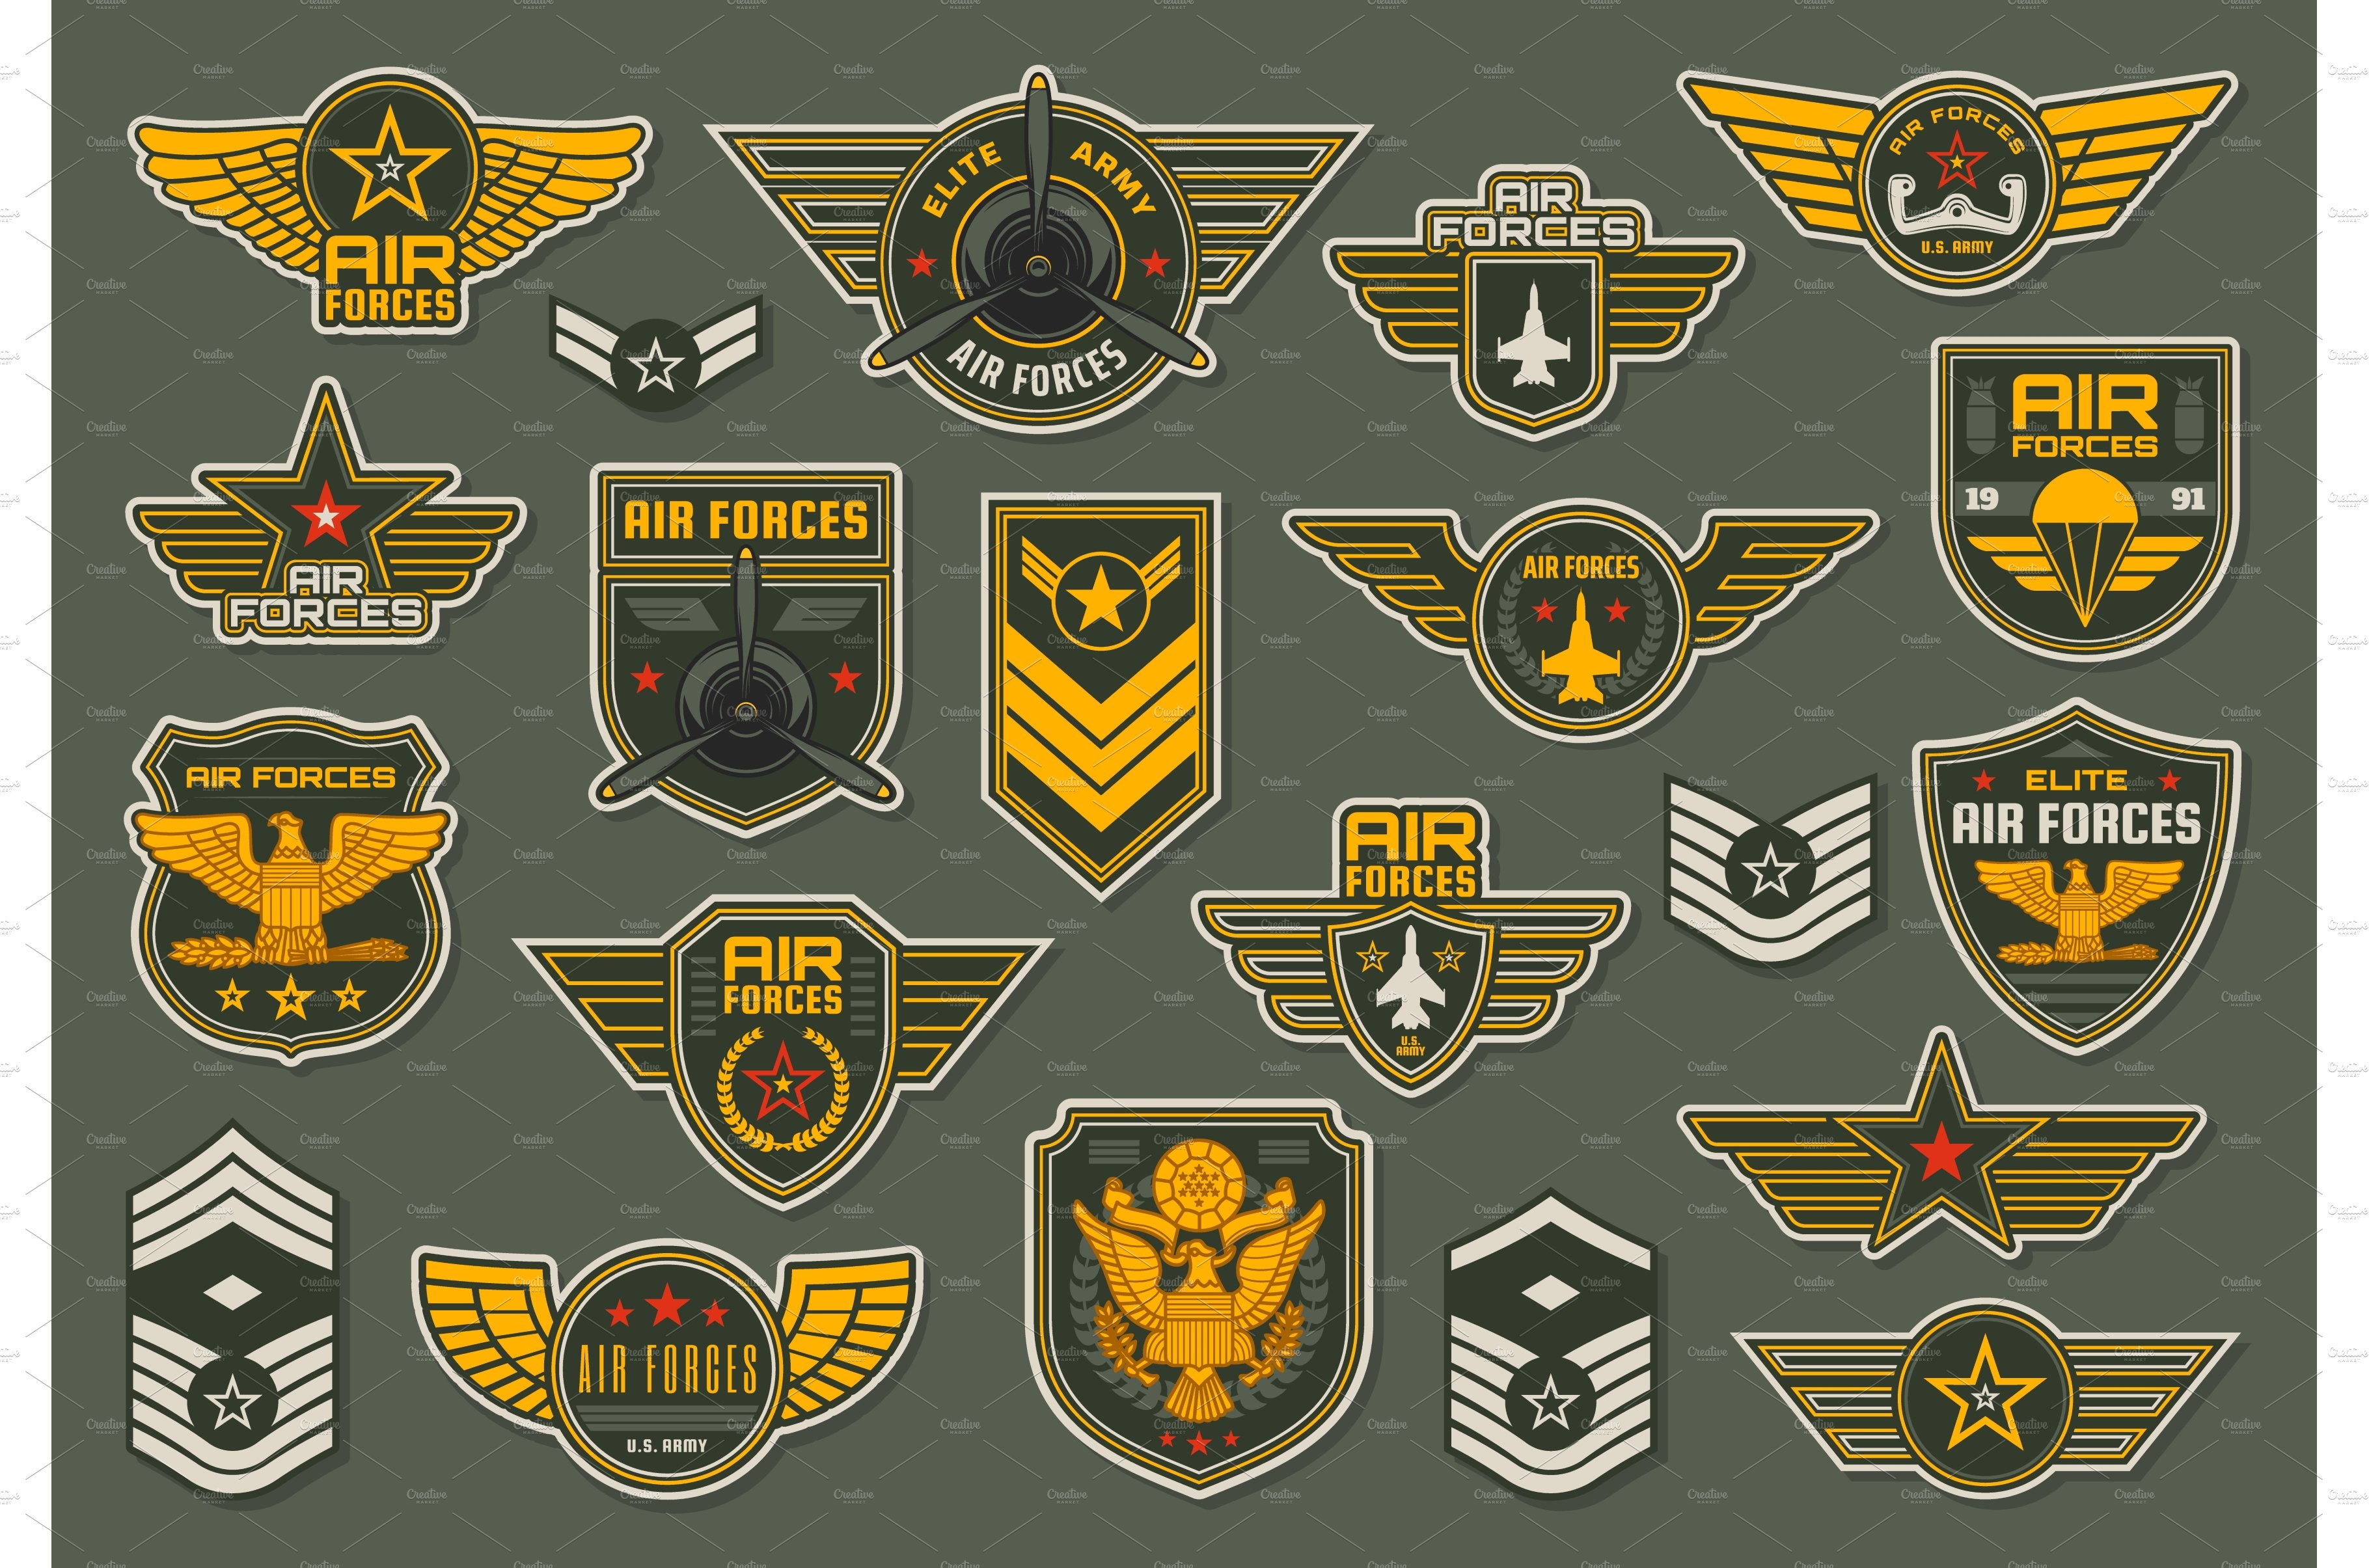 Army air forces, airborne badges cover image.